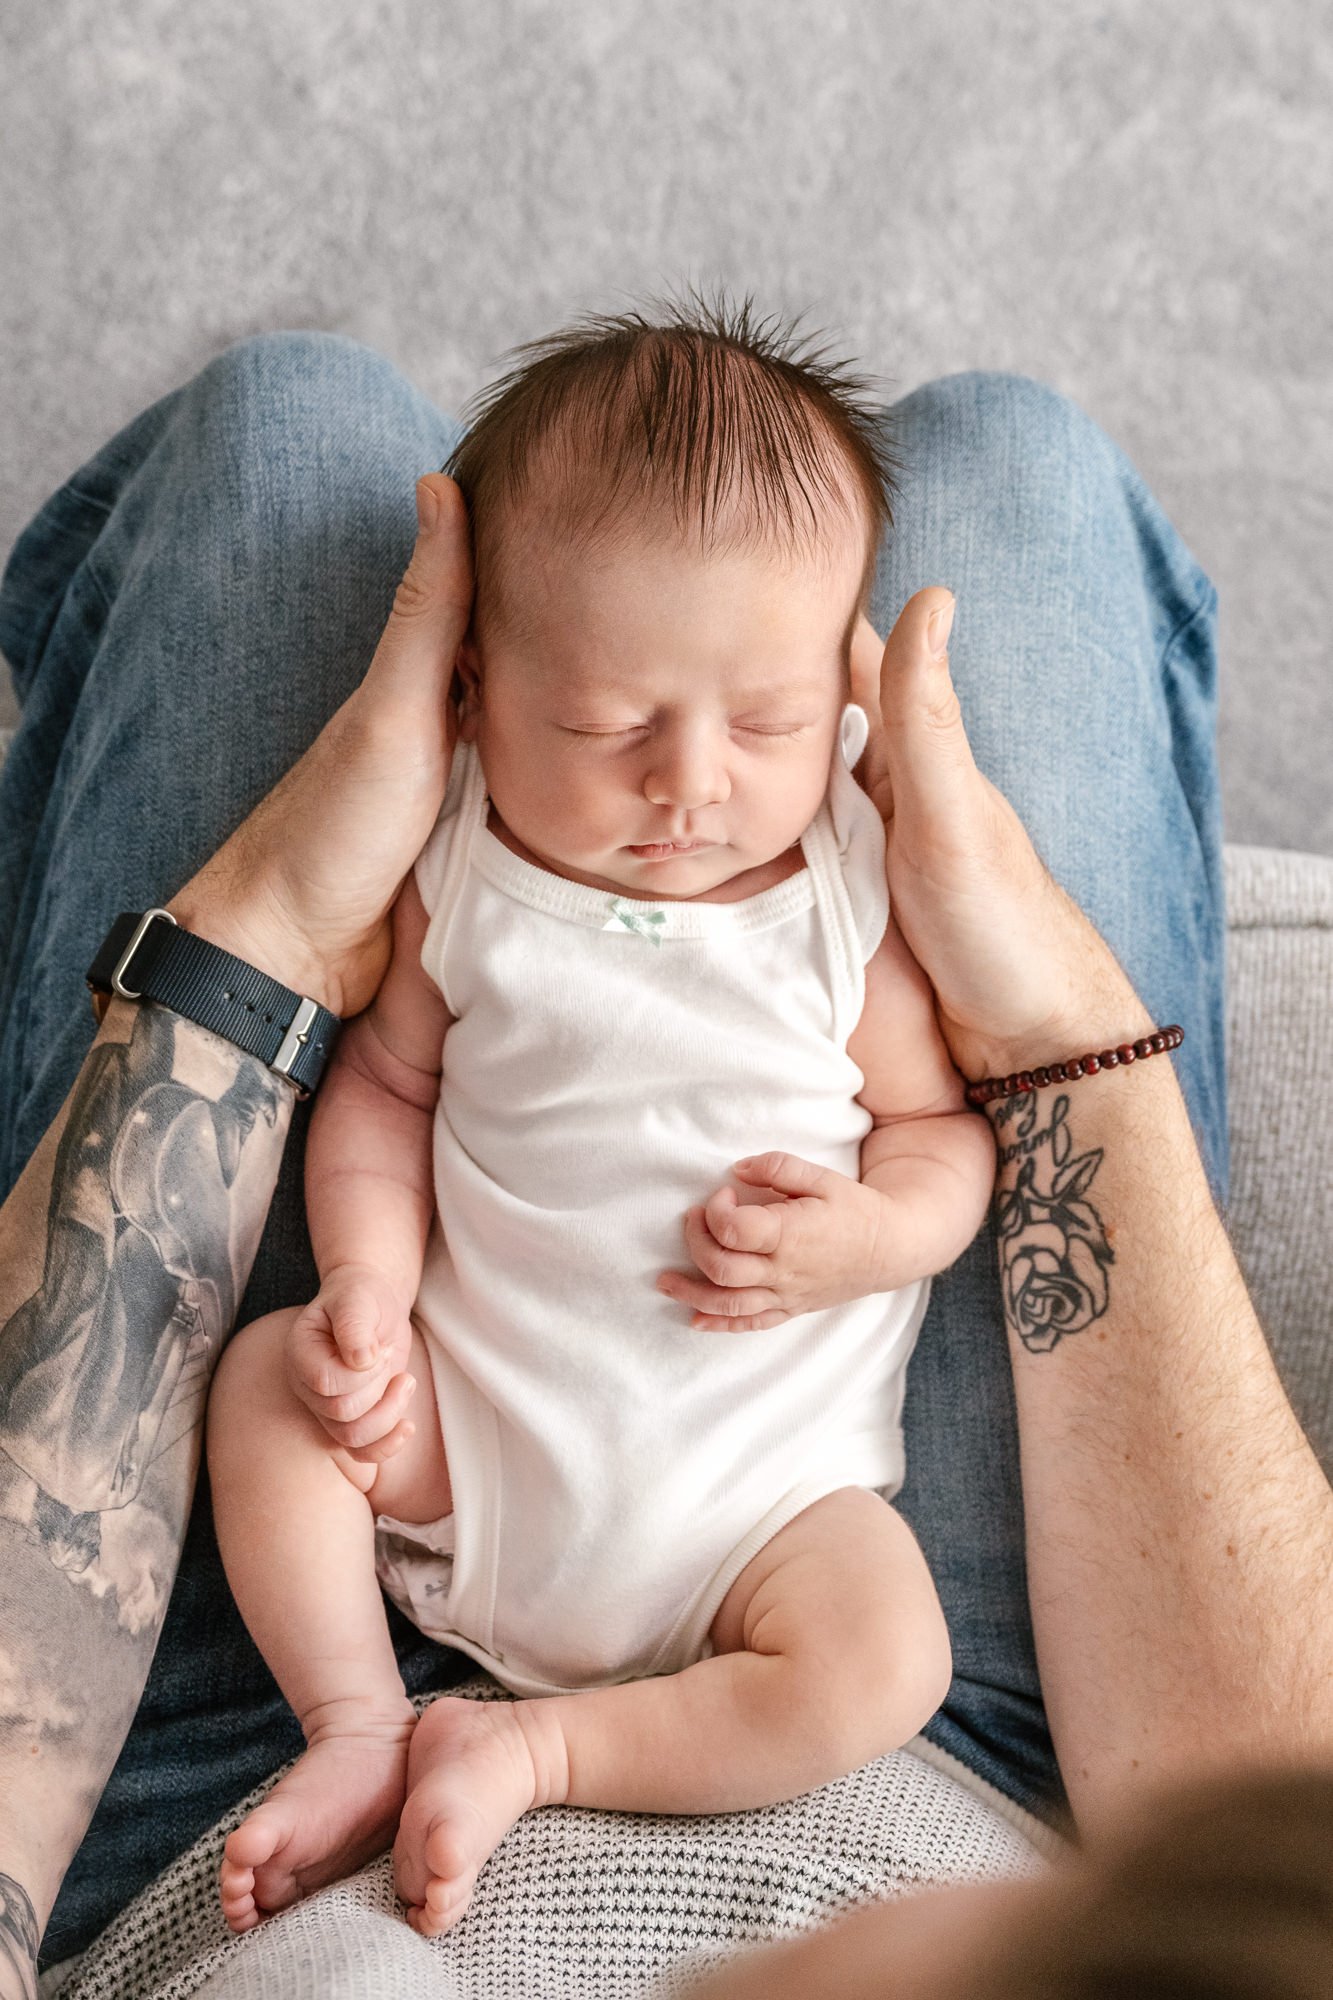  An aerial shot taken by Nicole Hawkins photography of a dad who lays newborn baby on his lap and holds her on his forearms. North Central New Jersey in-home newborn photo session. #centralNewJerseyphotographer #inhomeportraits #newbornphotoshoot #Ne